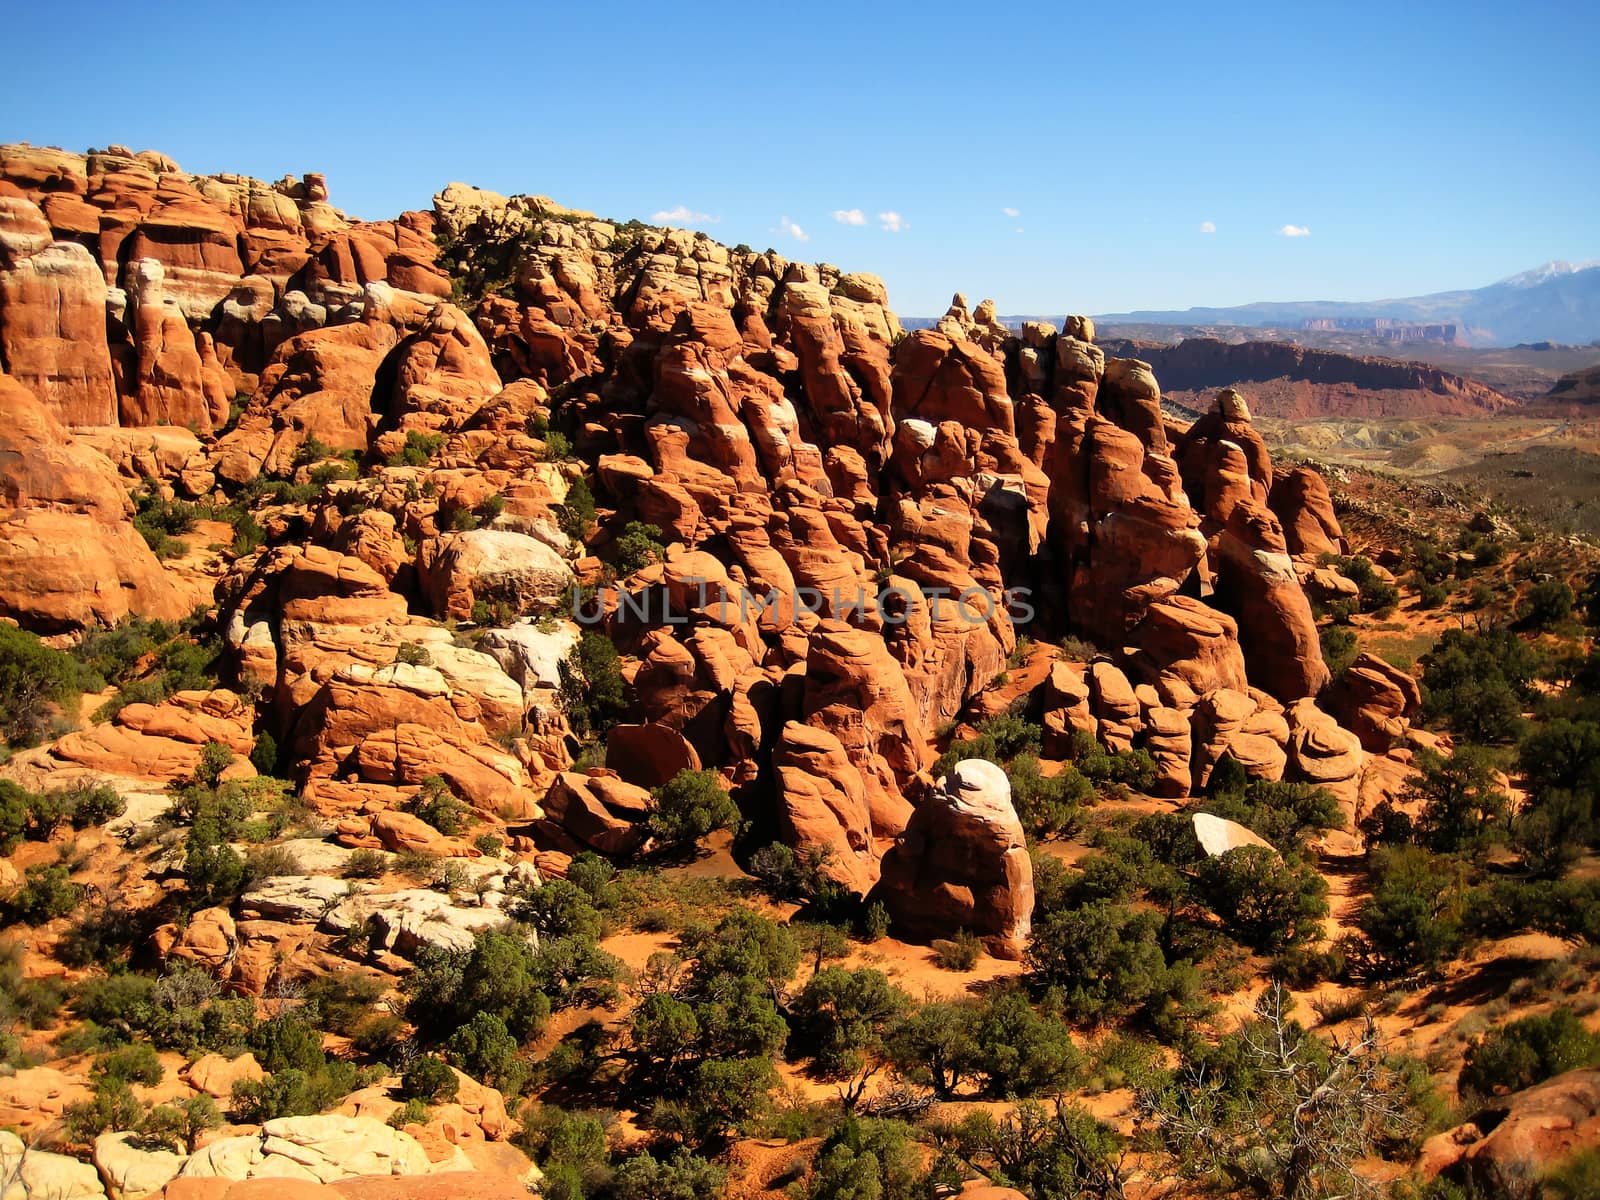 Sandstone outcrops in Arches National Park in Utah by jmubalde